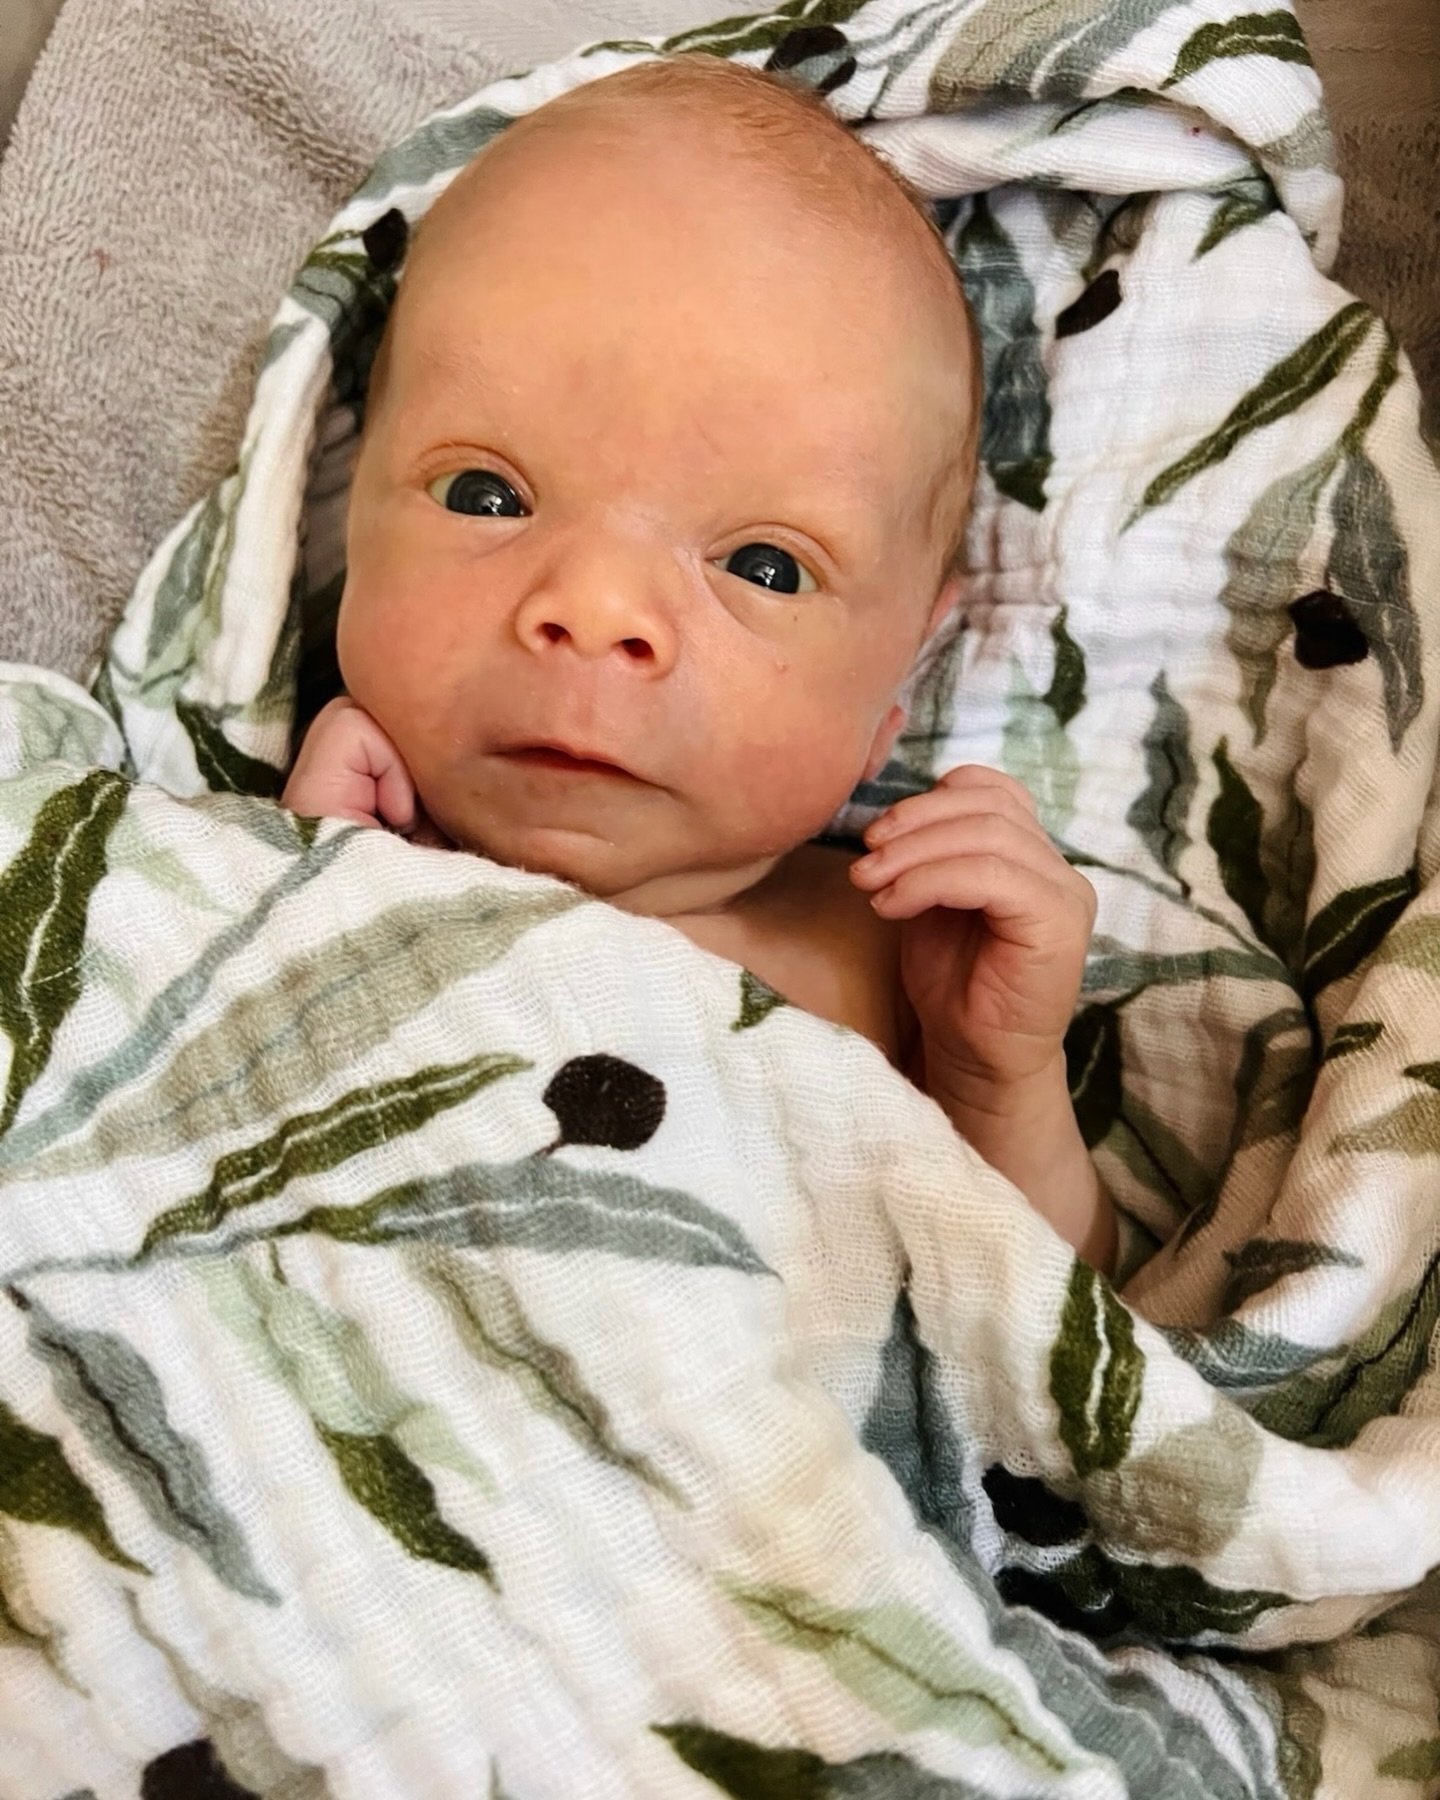 Join us in welcoming one of Hearth &amp; Home&rsquo;s newest babies, Lupin! This special little guy was born by Cesarean at OHSU a couple of weeks ago. His mom had a placenta previa in her pregnancy, which means that it was likely she and Lupin would